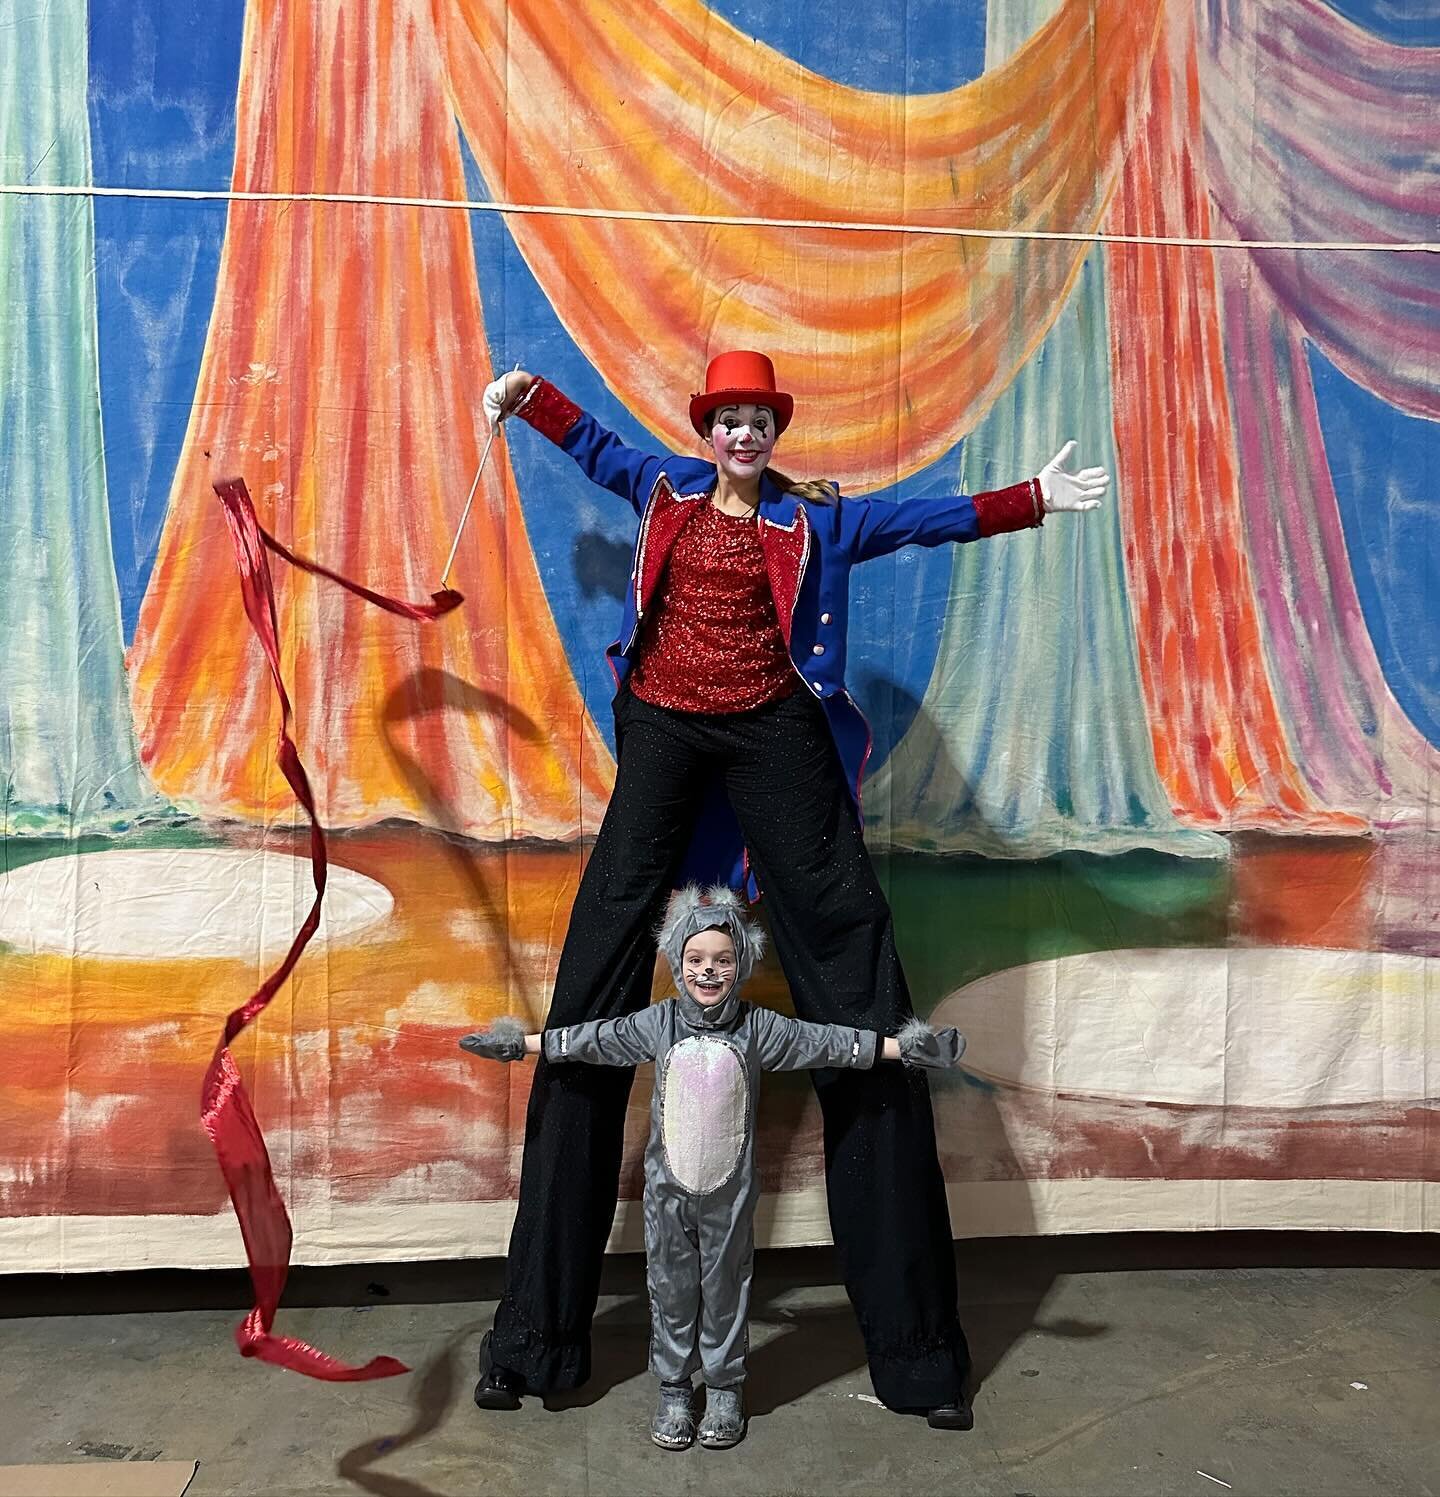 It&rsquo;s always a fun New Year&rsquo;s Day when I get to be a part of the @avenuersnyb routine in the @fancybrigade show and parade! 

I also had some fun painting the clowns and the mice! What made the day complete was having my son in the show wi